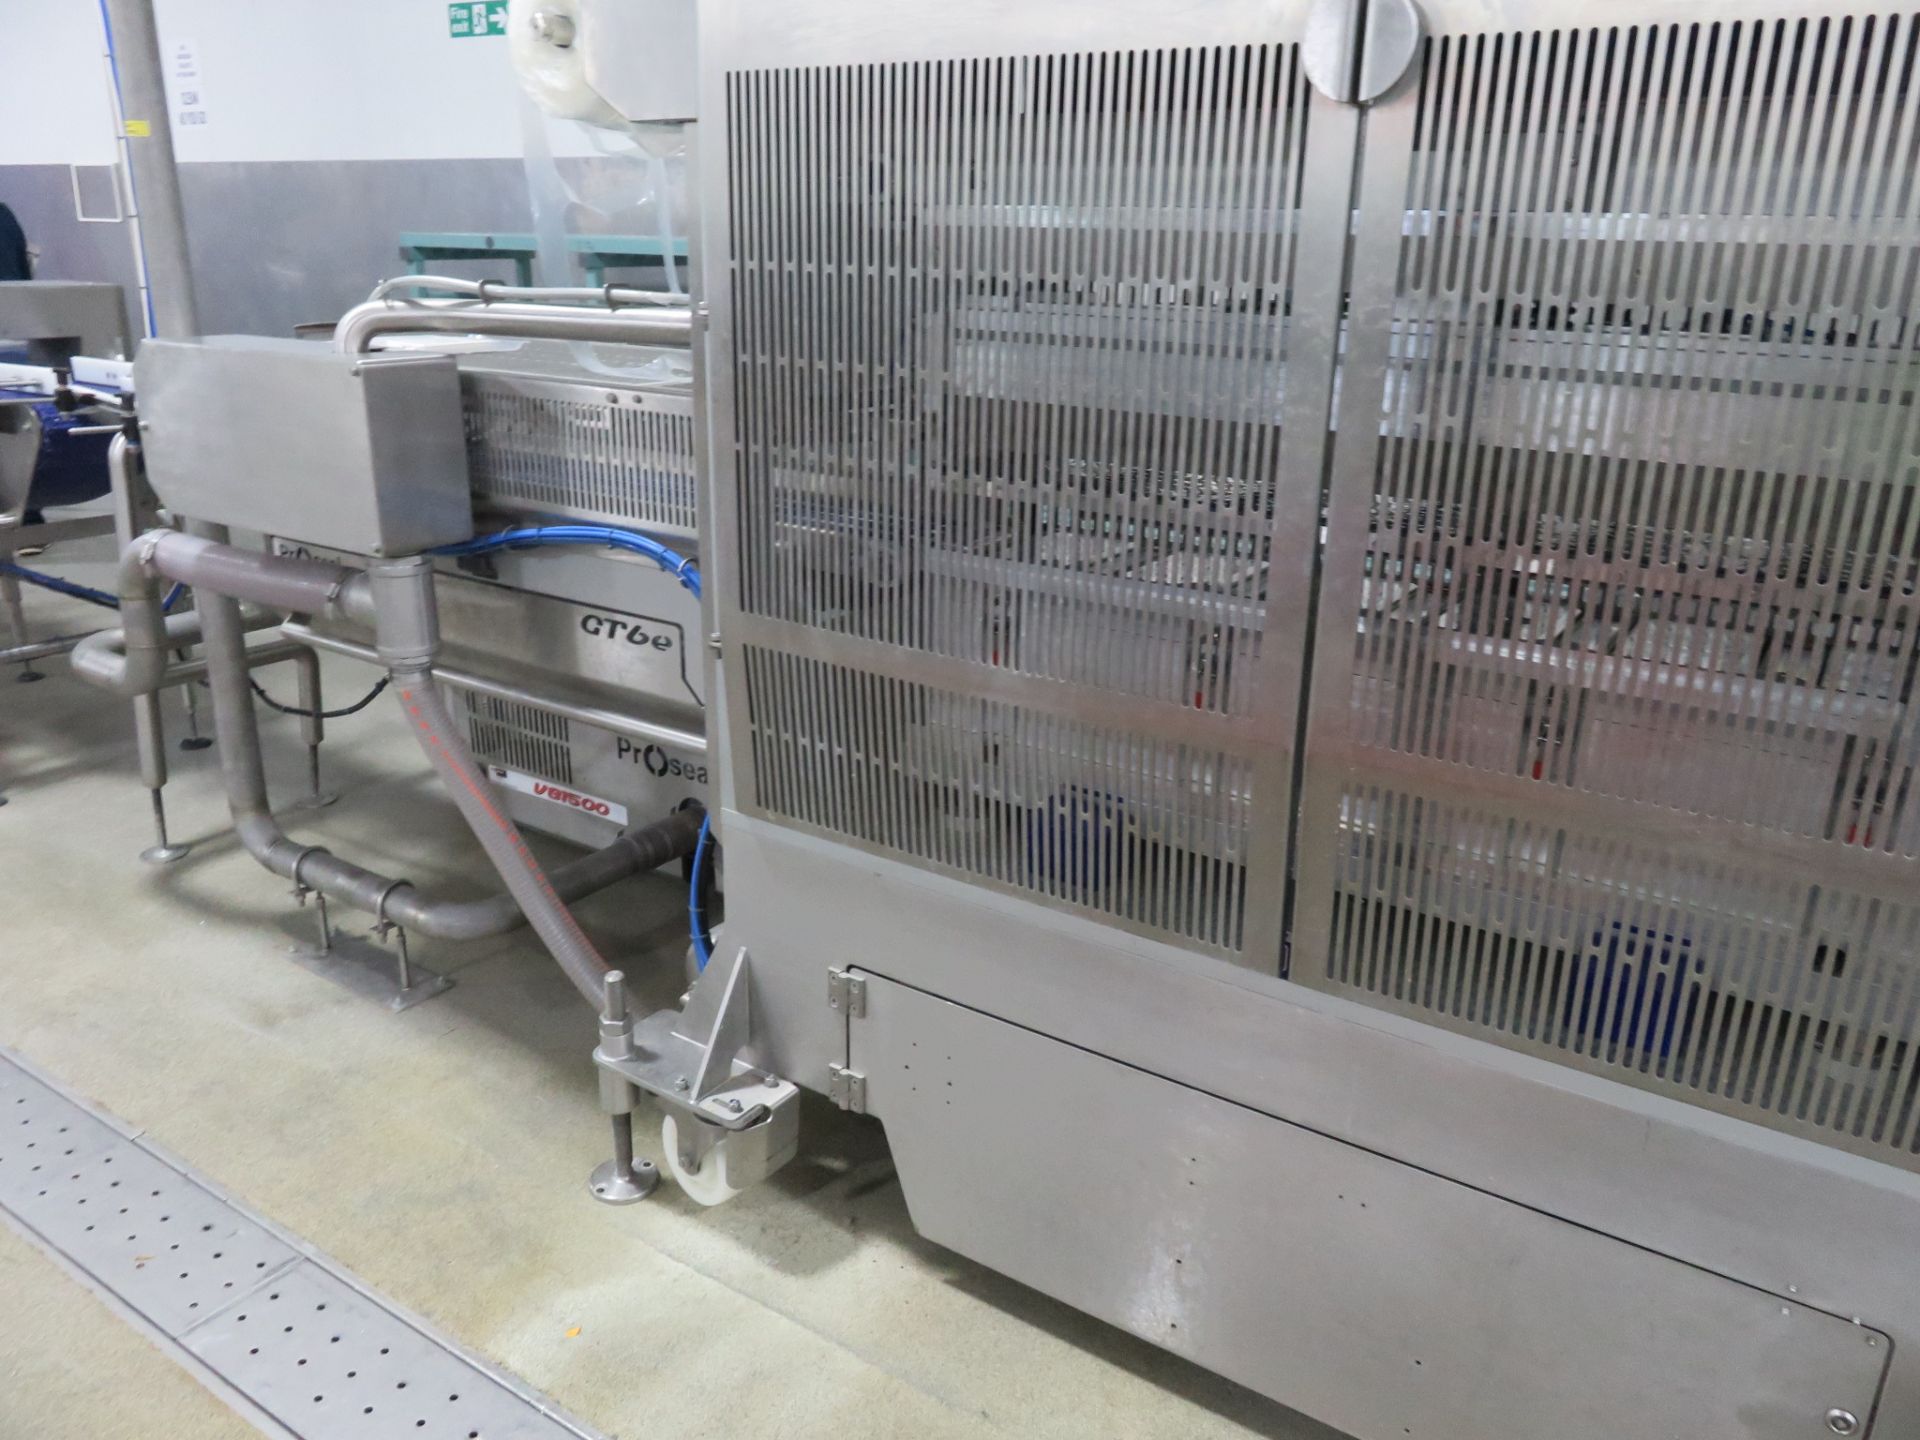 PROSEAL GT6e SKIN PLUS TRAY SEALING MACHINE - ONLY 18 MONTHS OLD. PART OF A COMBINATION LOT193. - Image 2 of 20